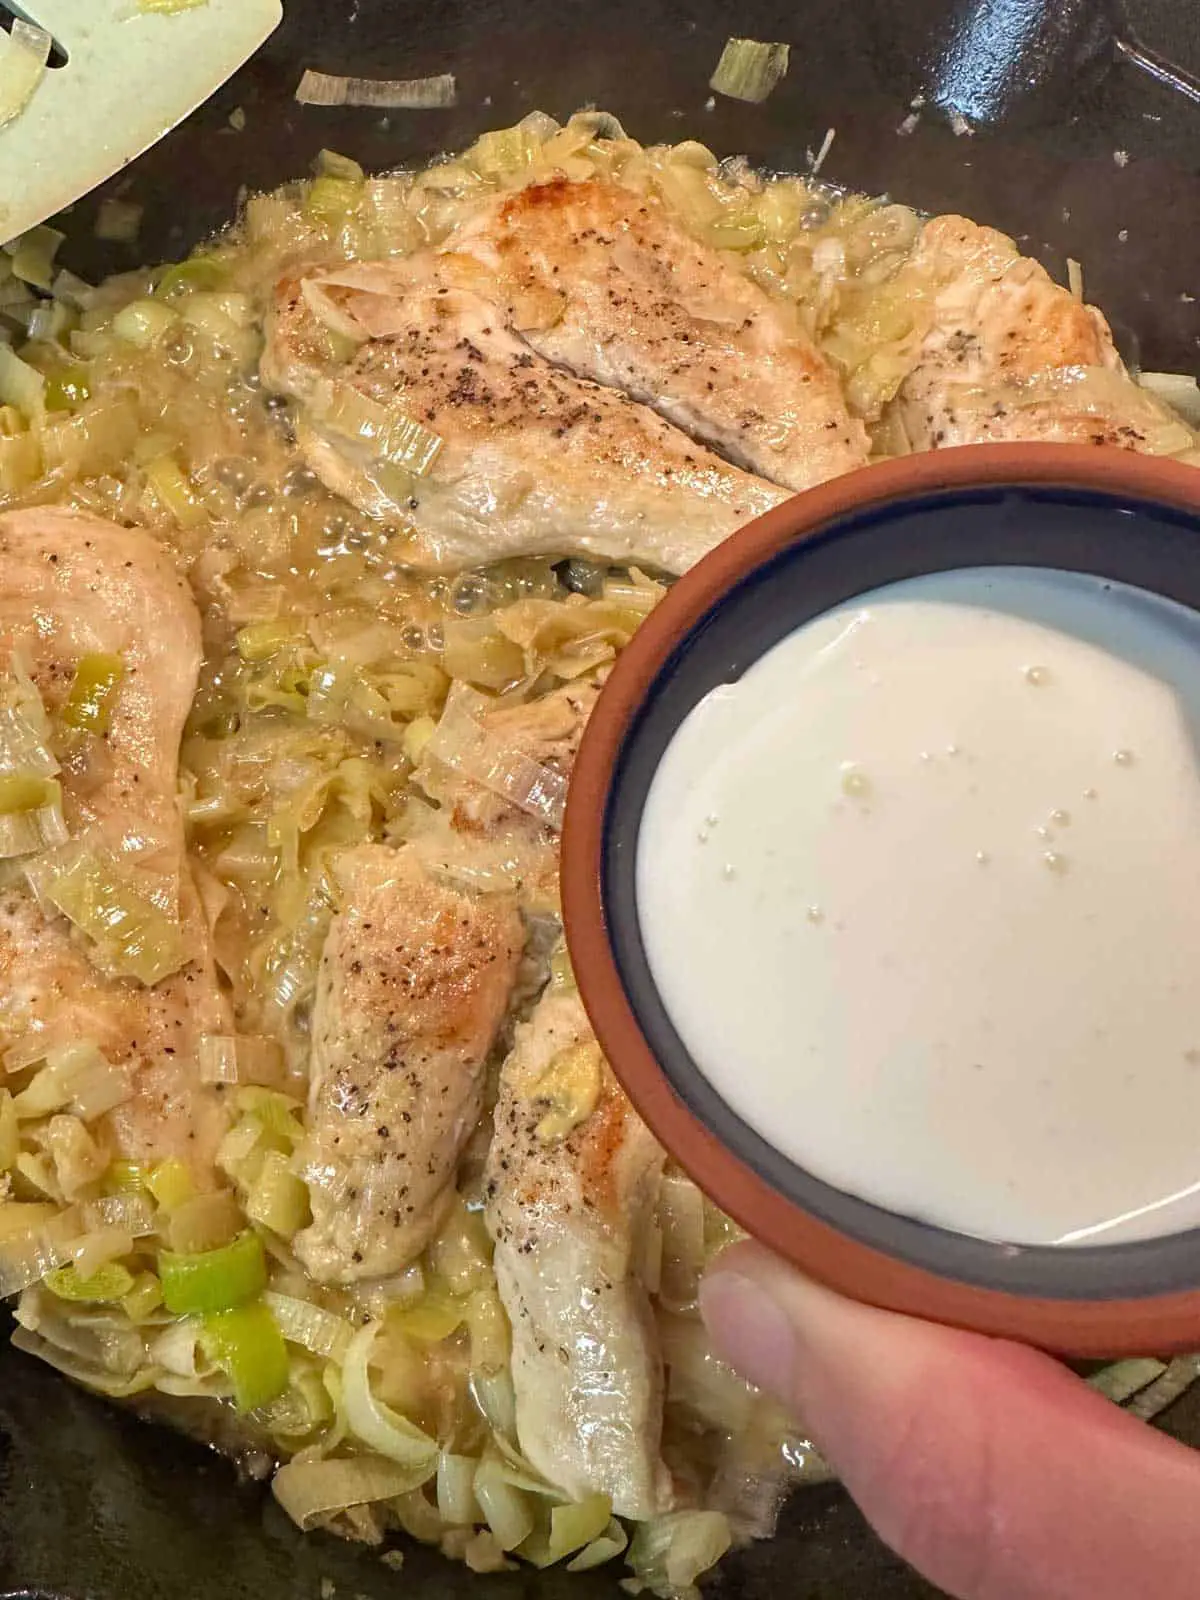 Chicken cooked with leeks in a cast iron pan. There is a blue silicone utensil on the top left and someone holding a small bowl with heavy cream poised over the chicken.